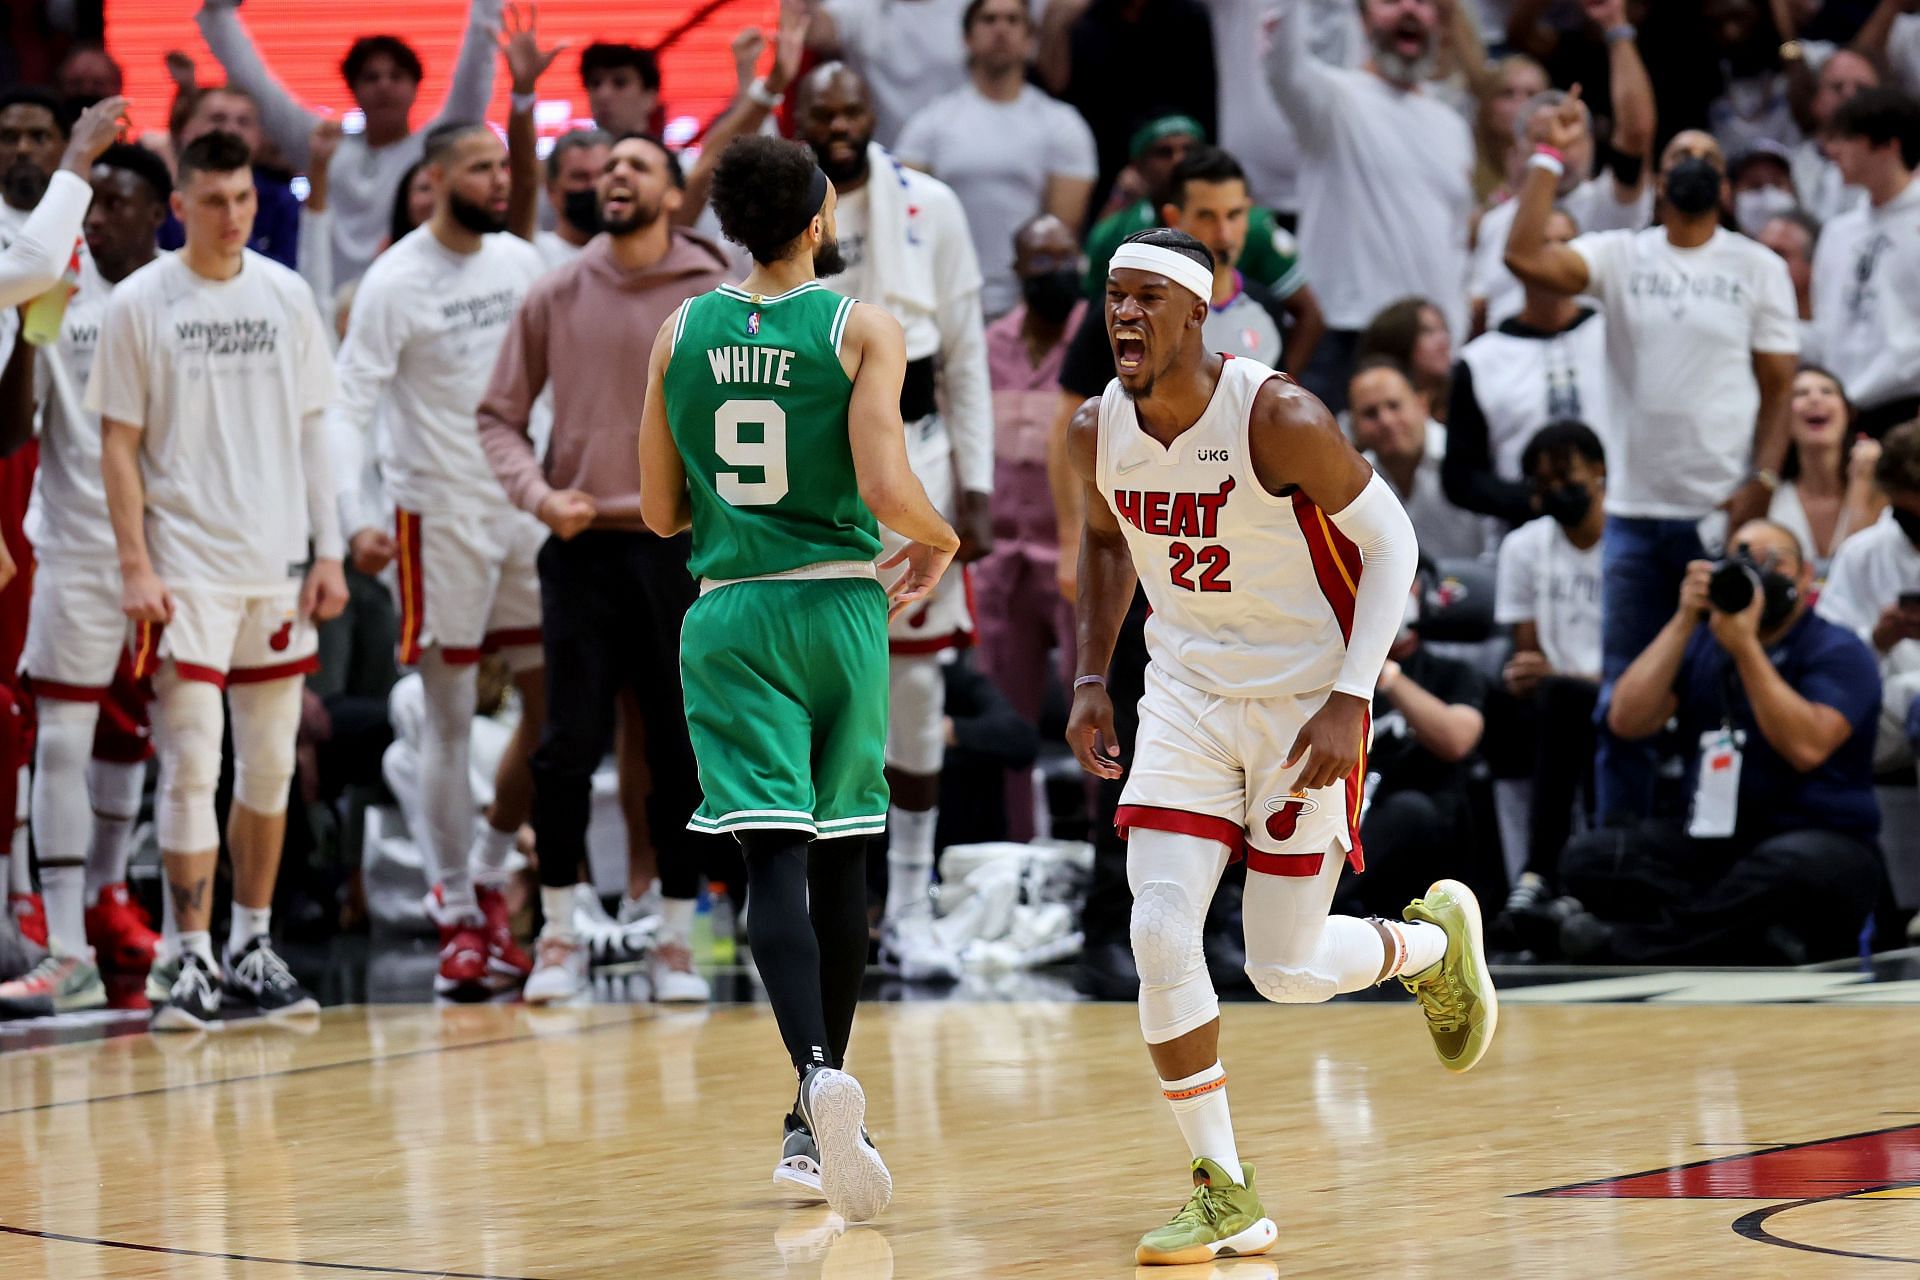 The Boston Celtics had no answer for Jimmy Butler in Game 1 of the Eastern Conference finals versus the Miami Heat.